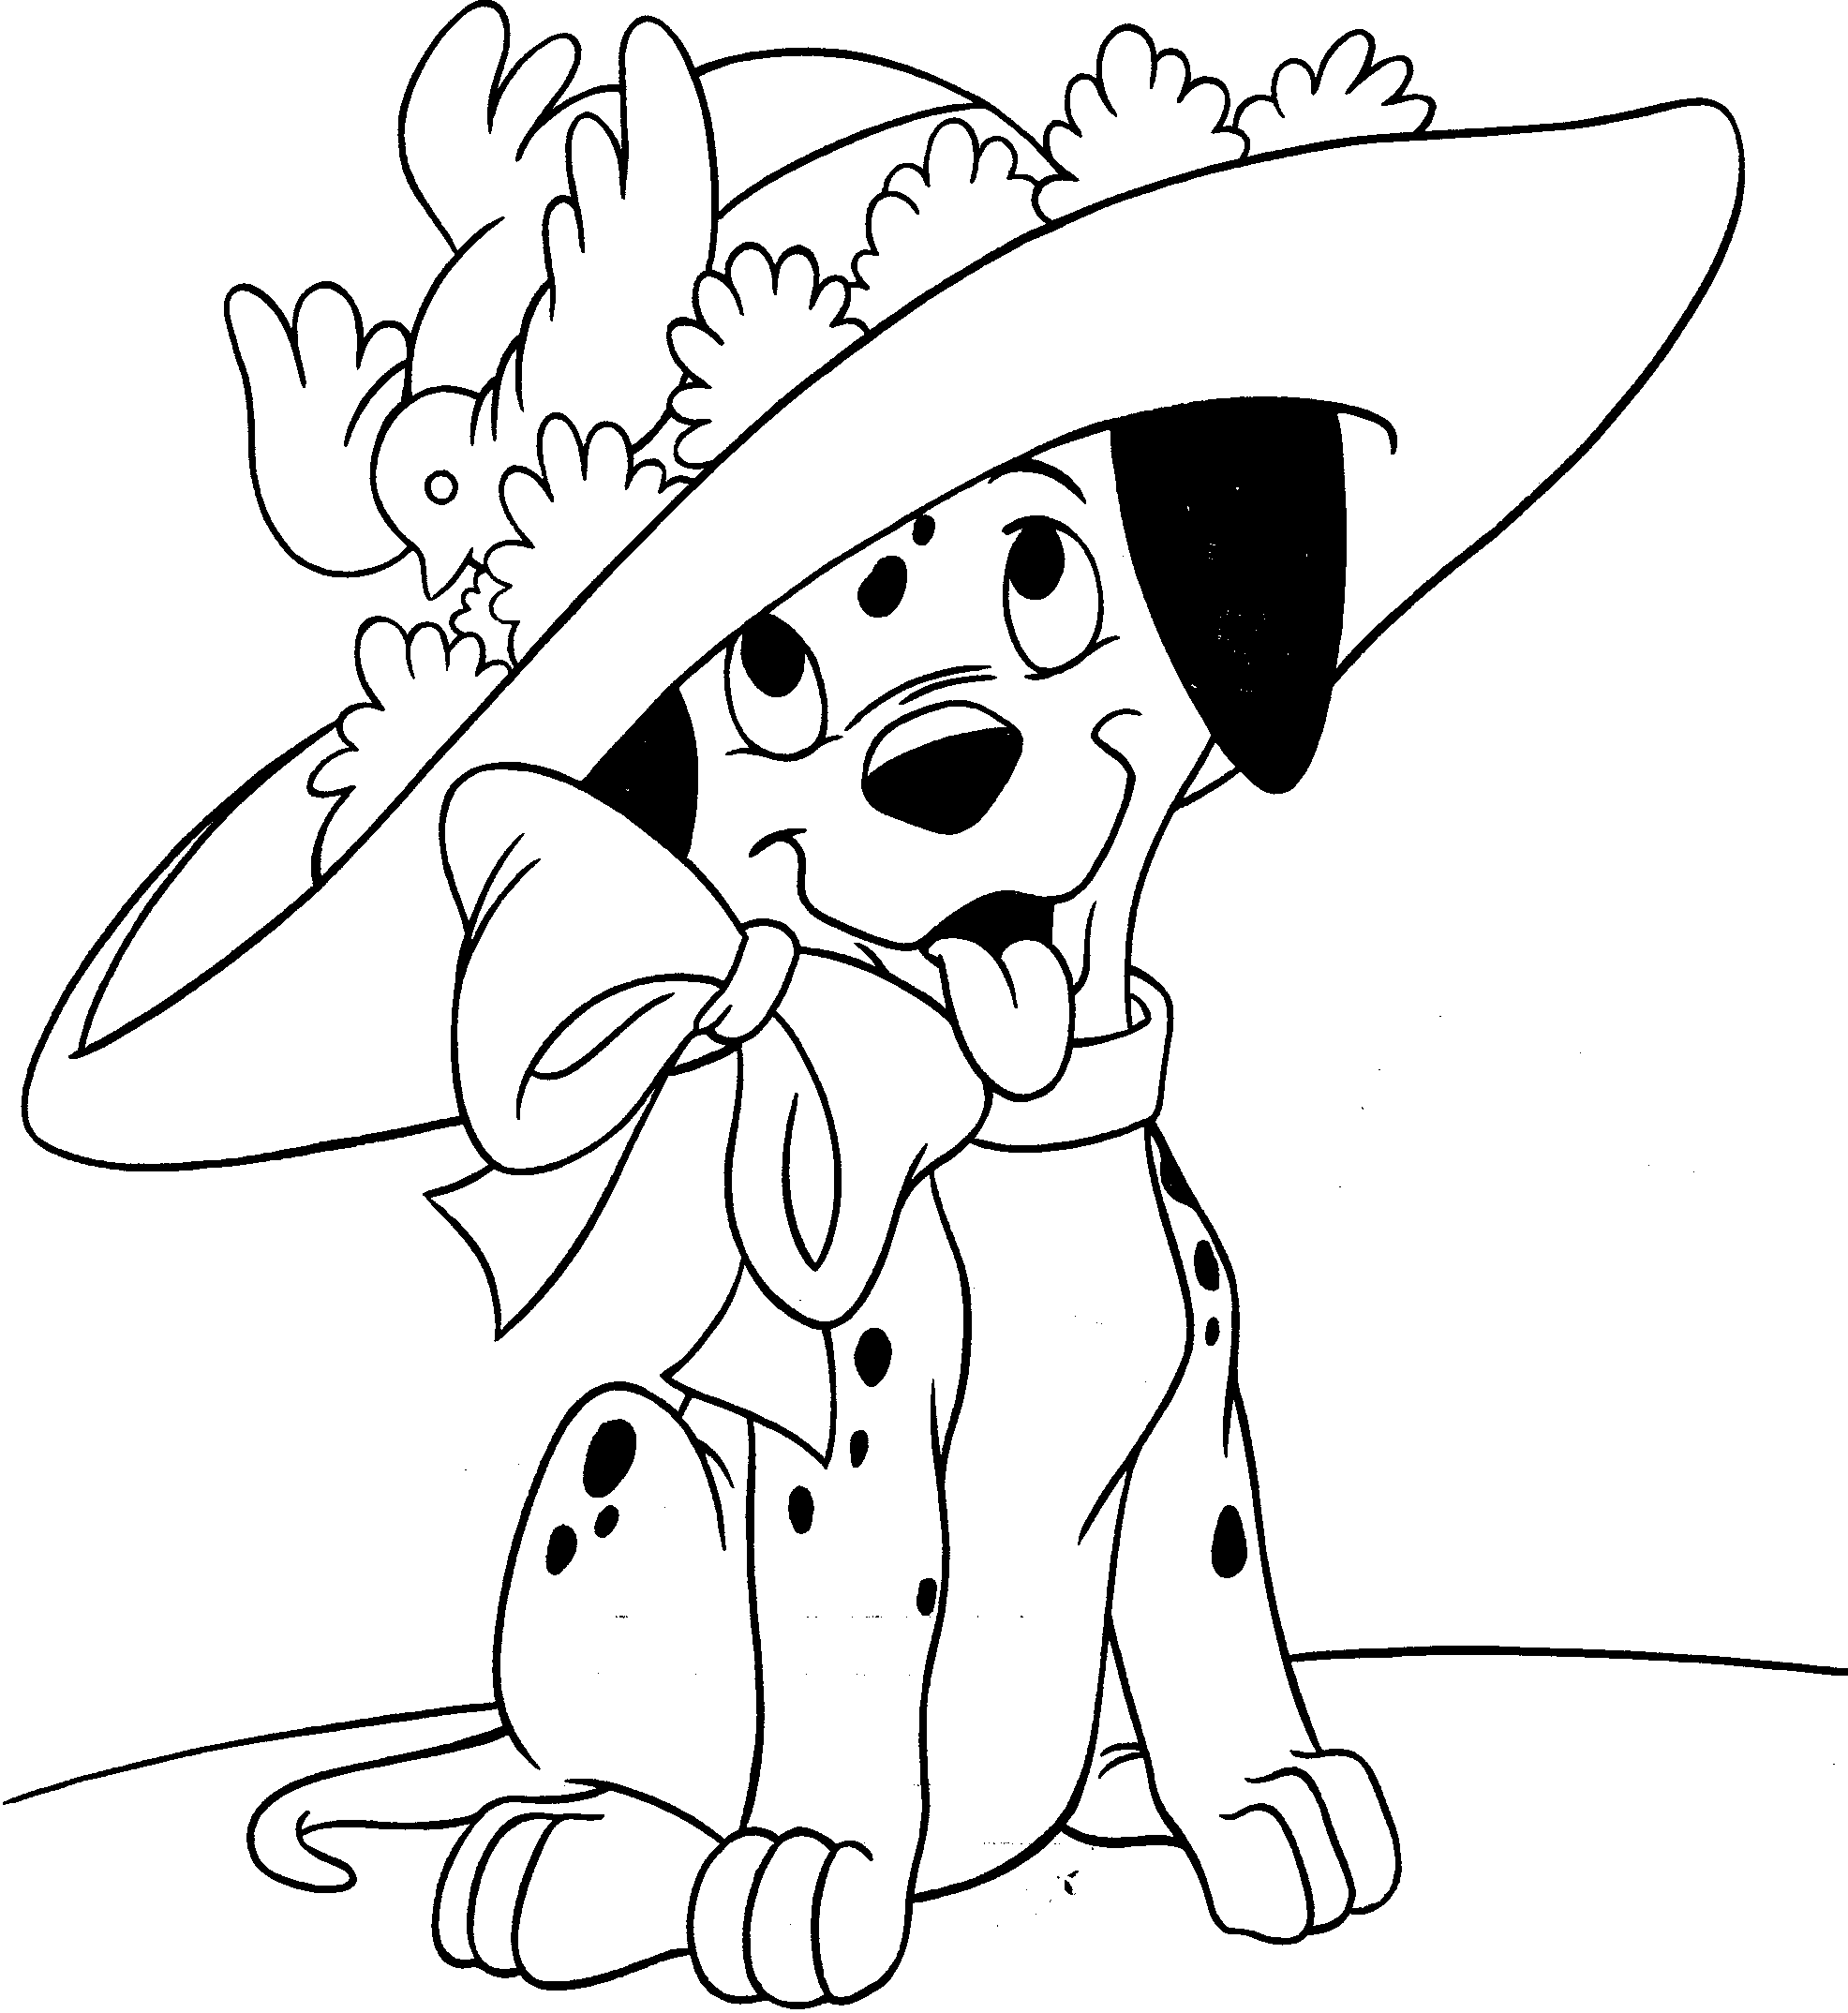 Dalmatian With Fancy Hat Coloring Page | Animal pages of ...